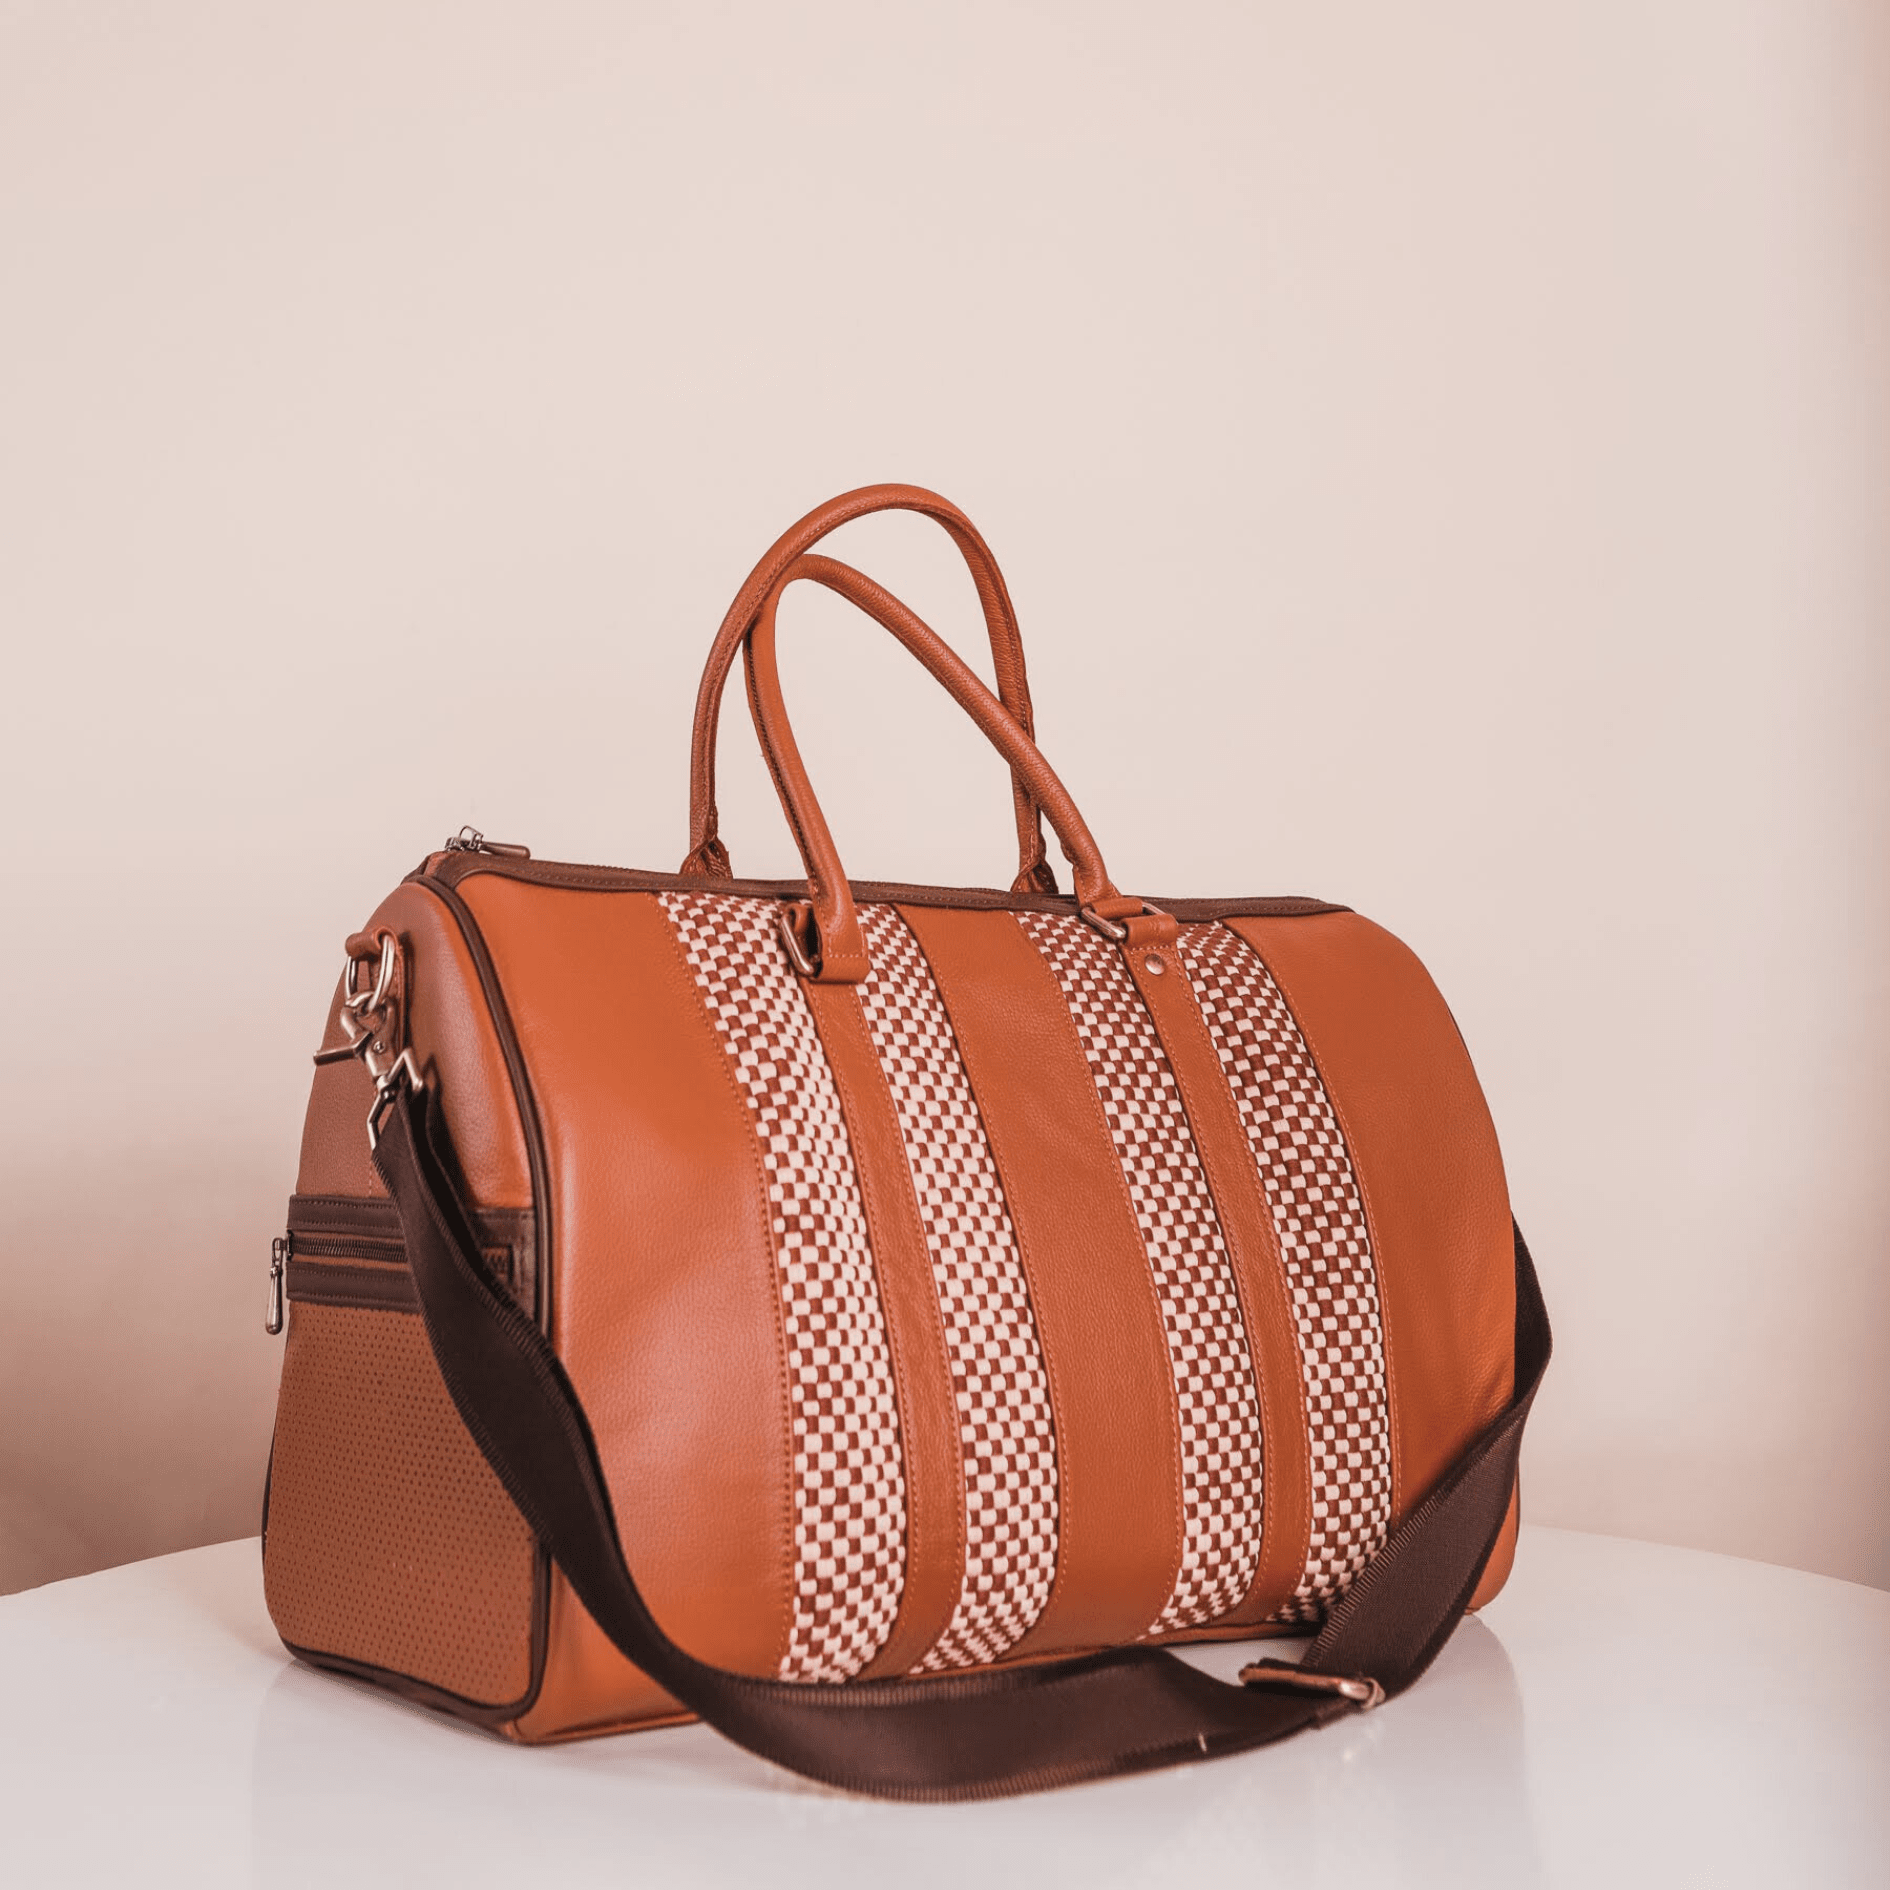 The Platinum Travel Globetrotter Duffle in Tan R2R